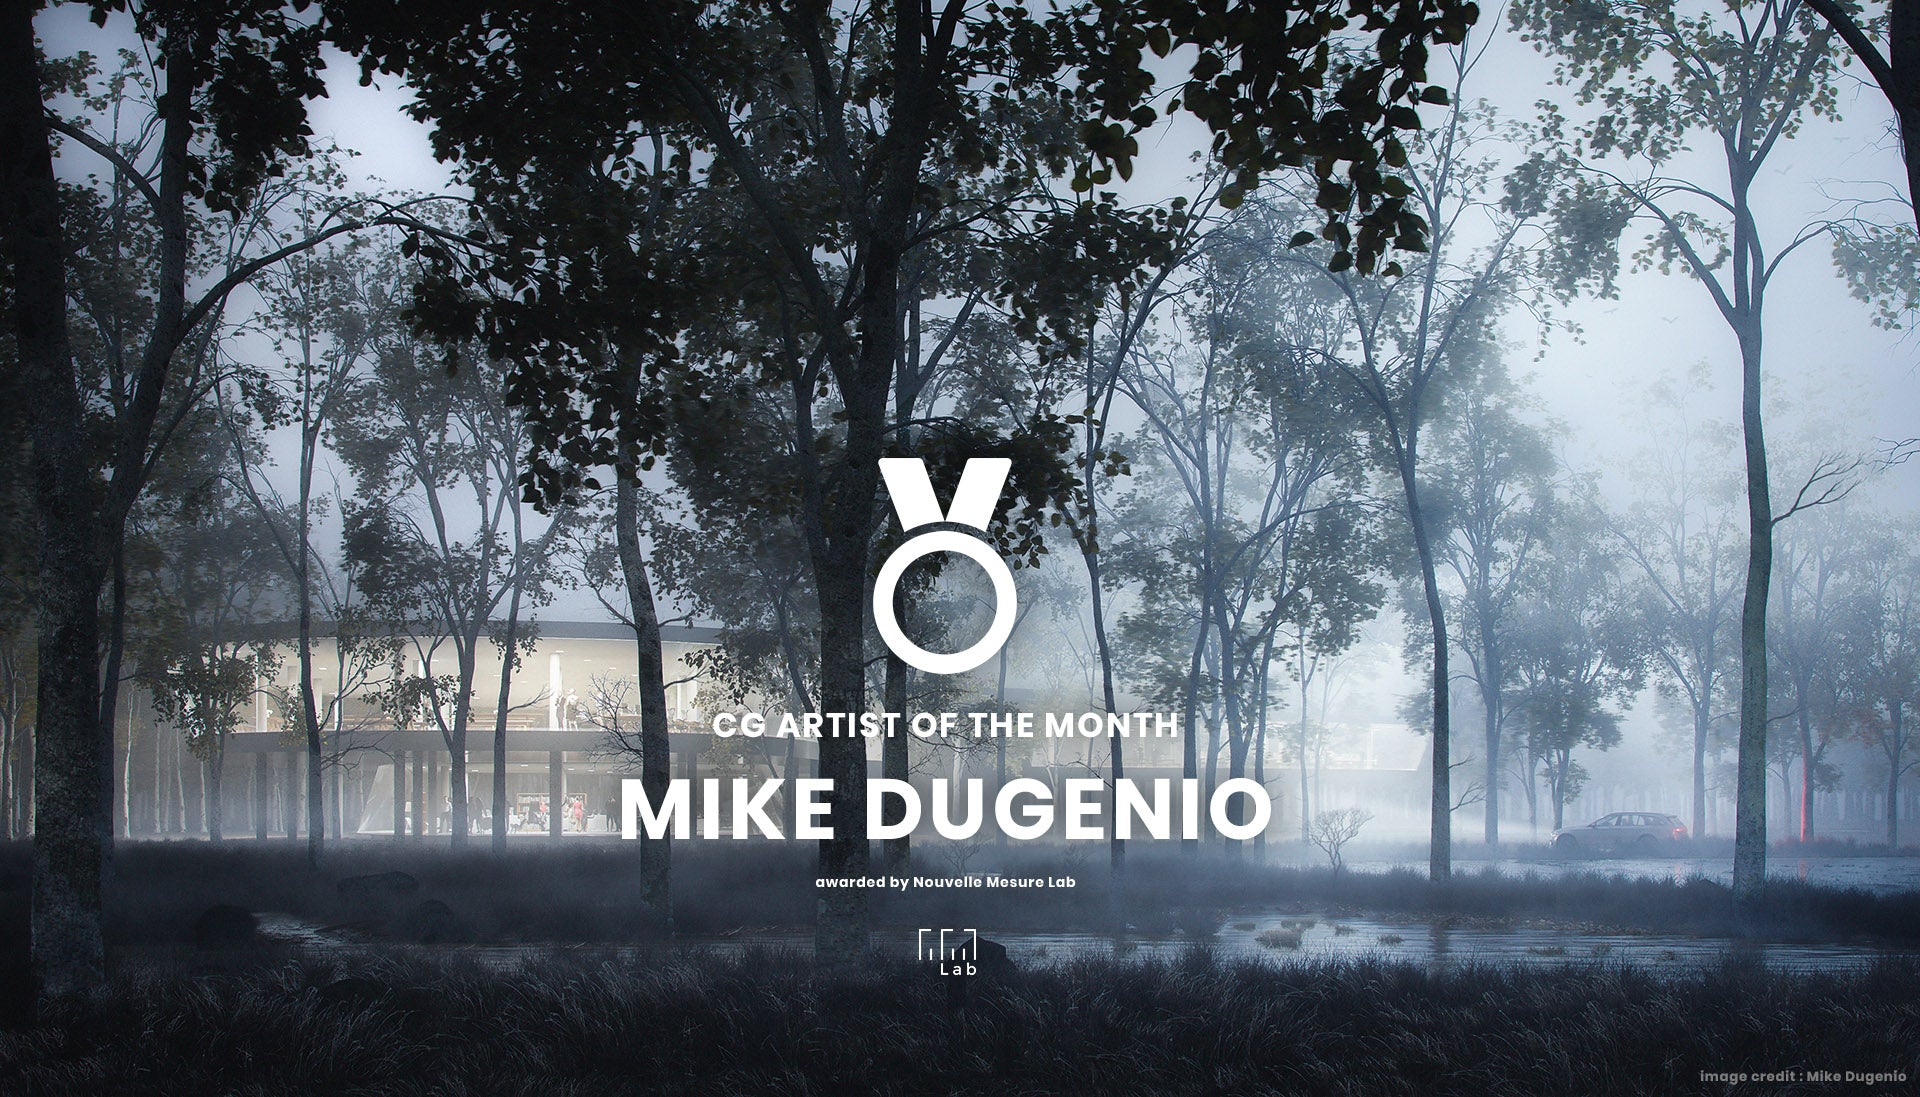 CG Artist of the month: Mike Dugenio | Interview